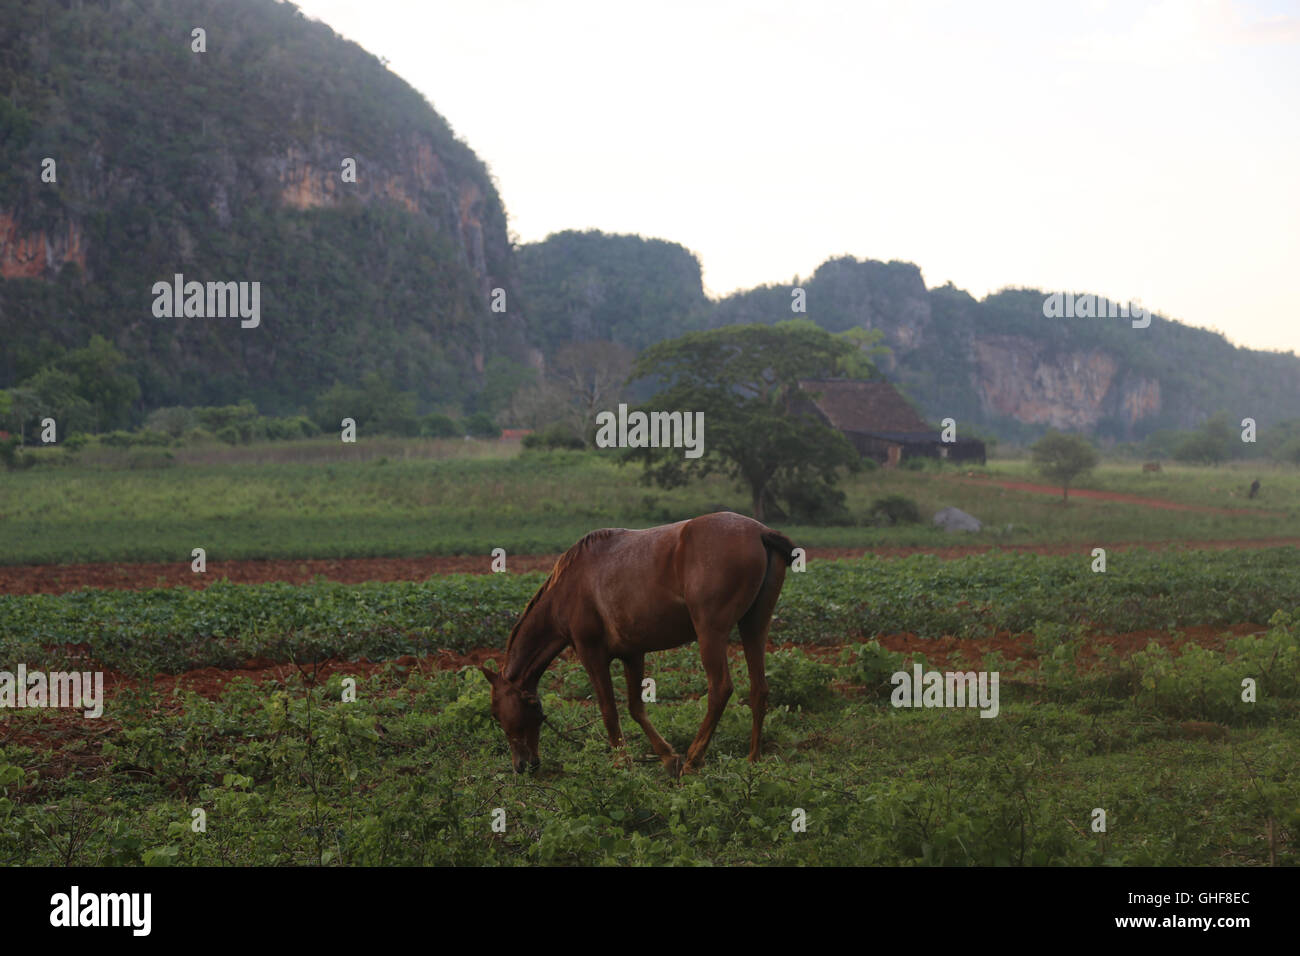 A horse grazing in Vinales Valley, Cuba Stock Photo